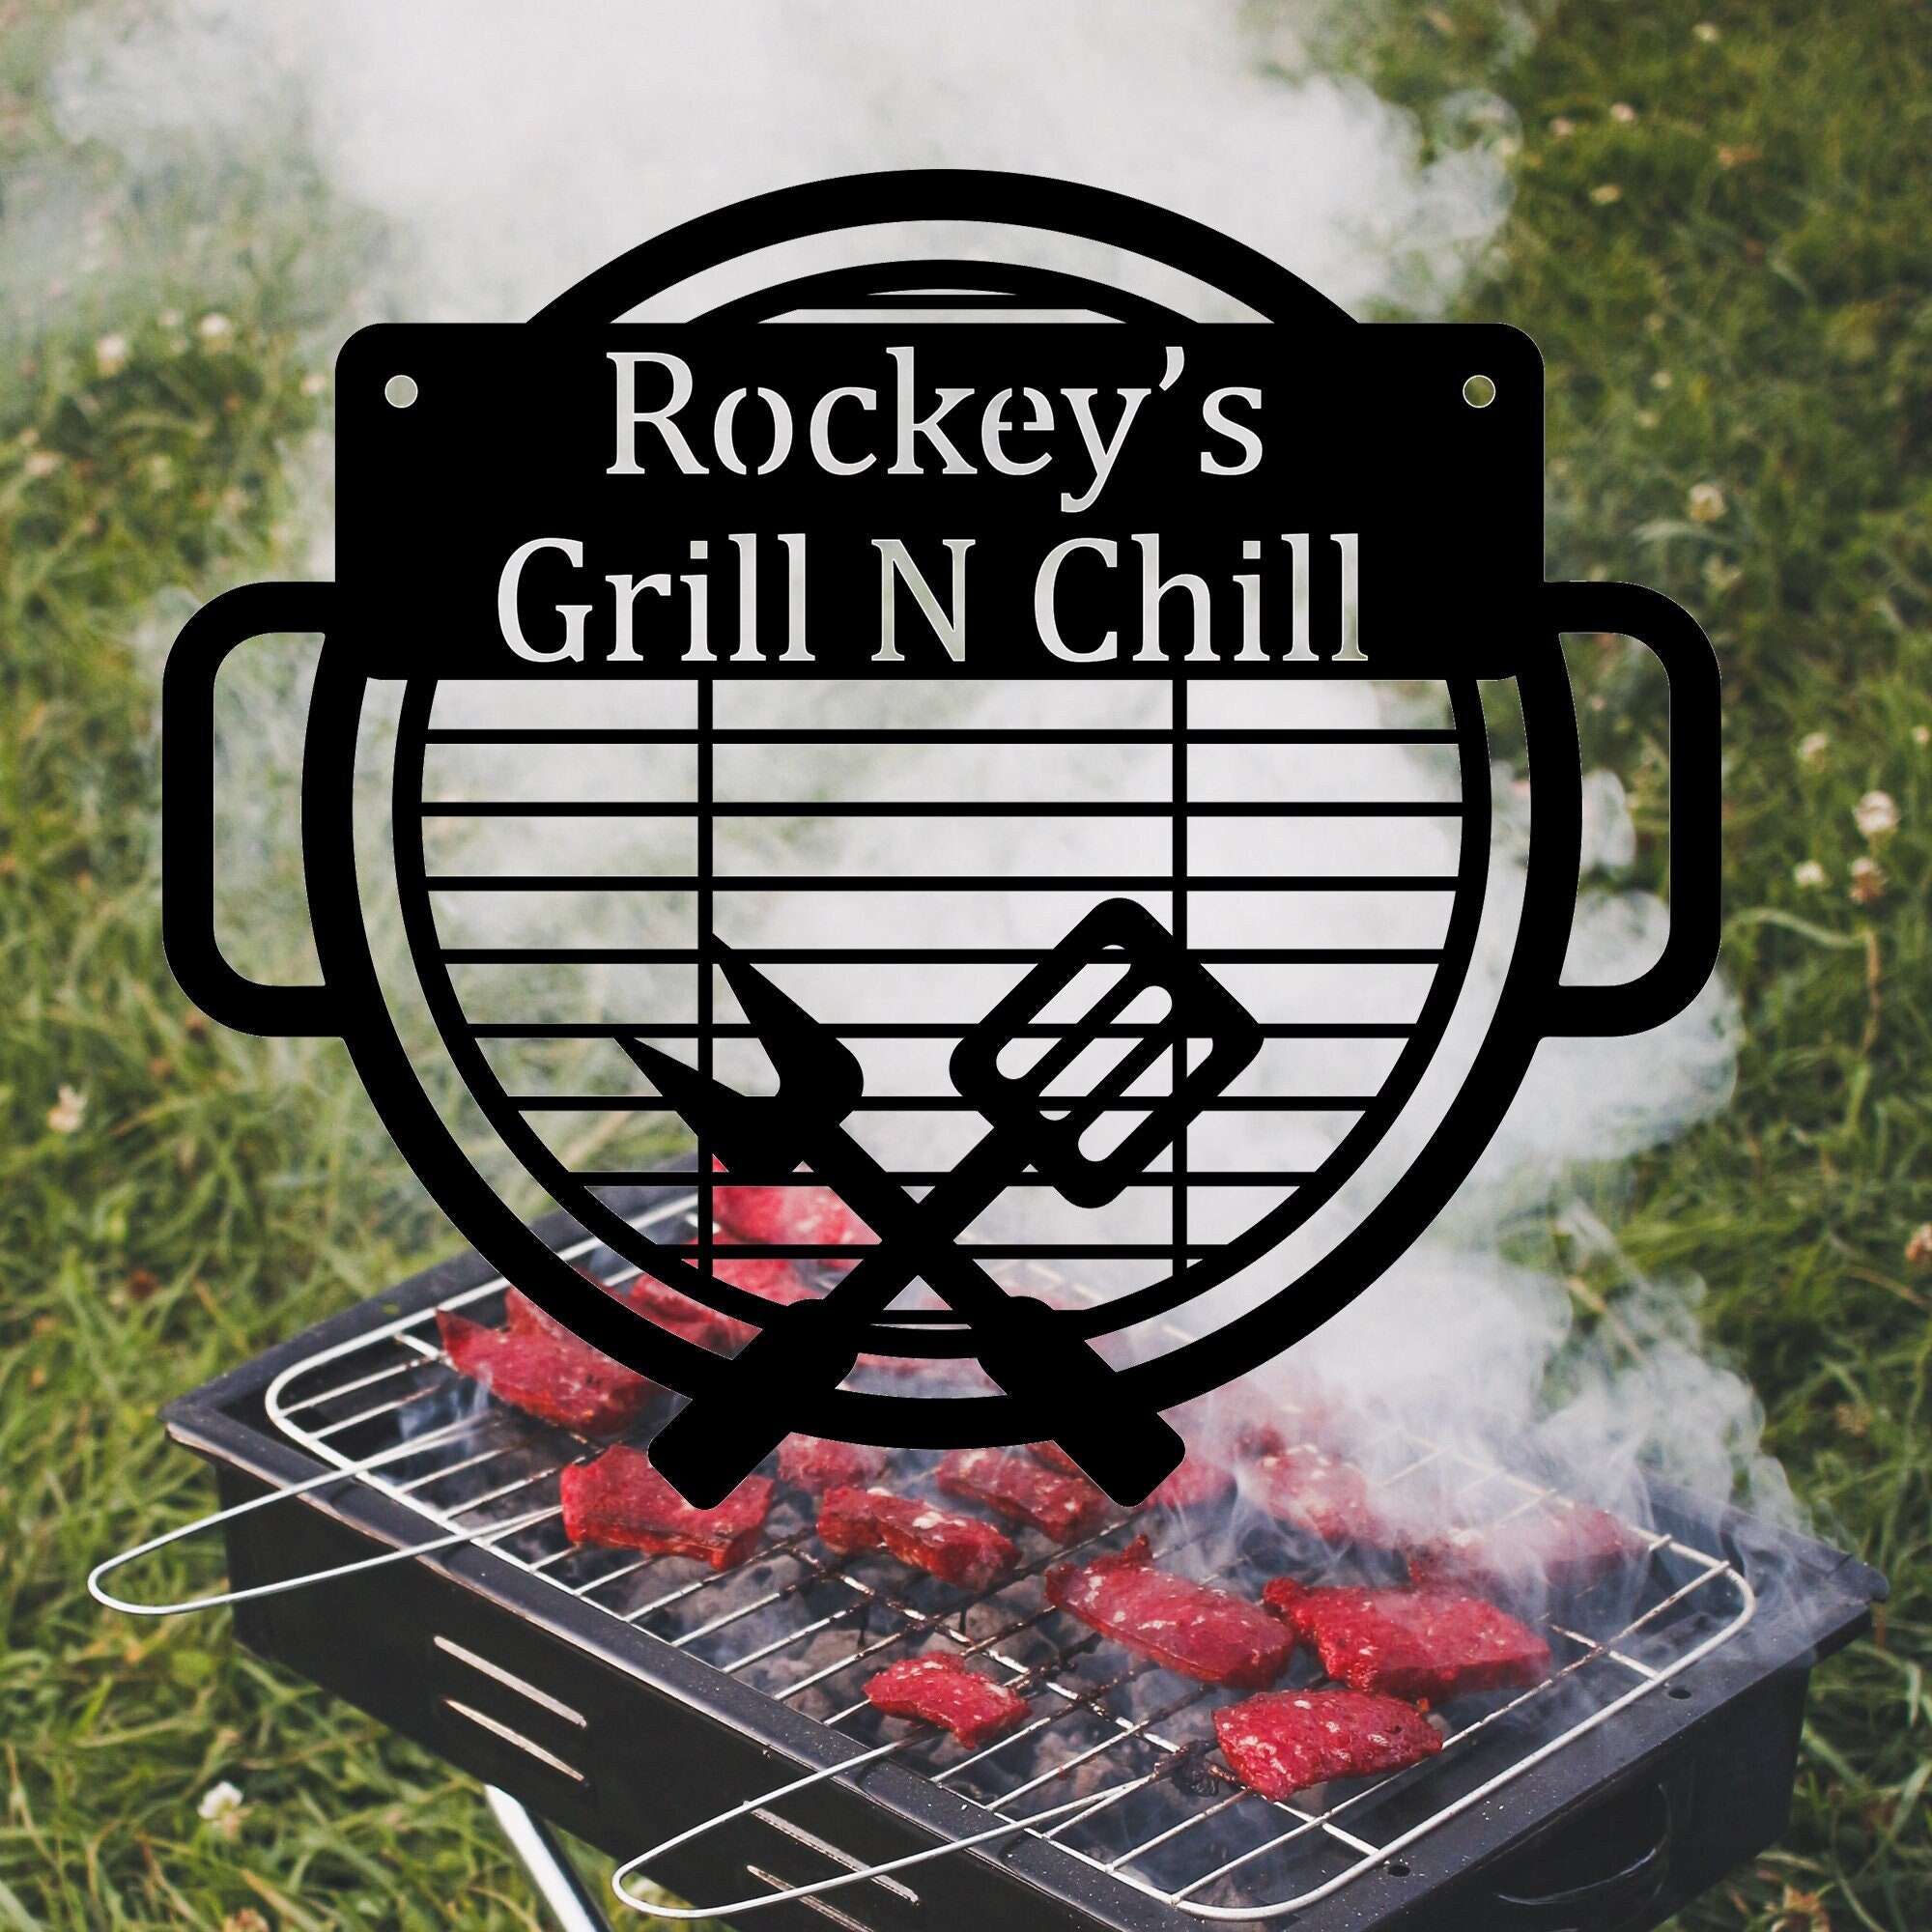 Smokin' Hot Plaques - Personalized Outdoor Hanging Barbecue Signs